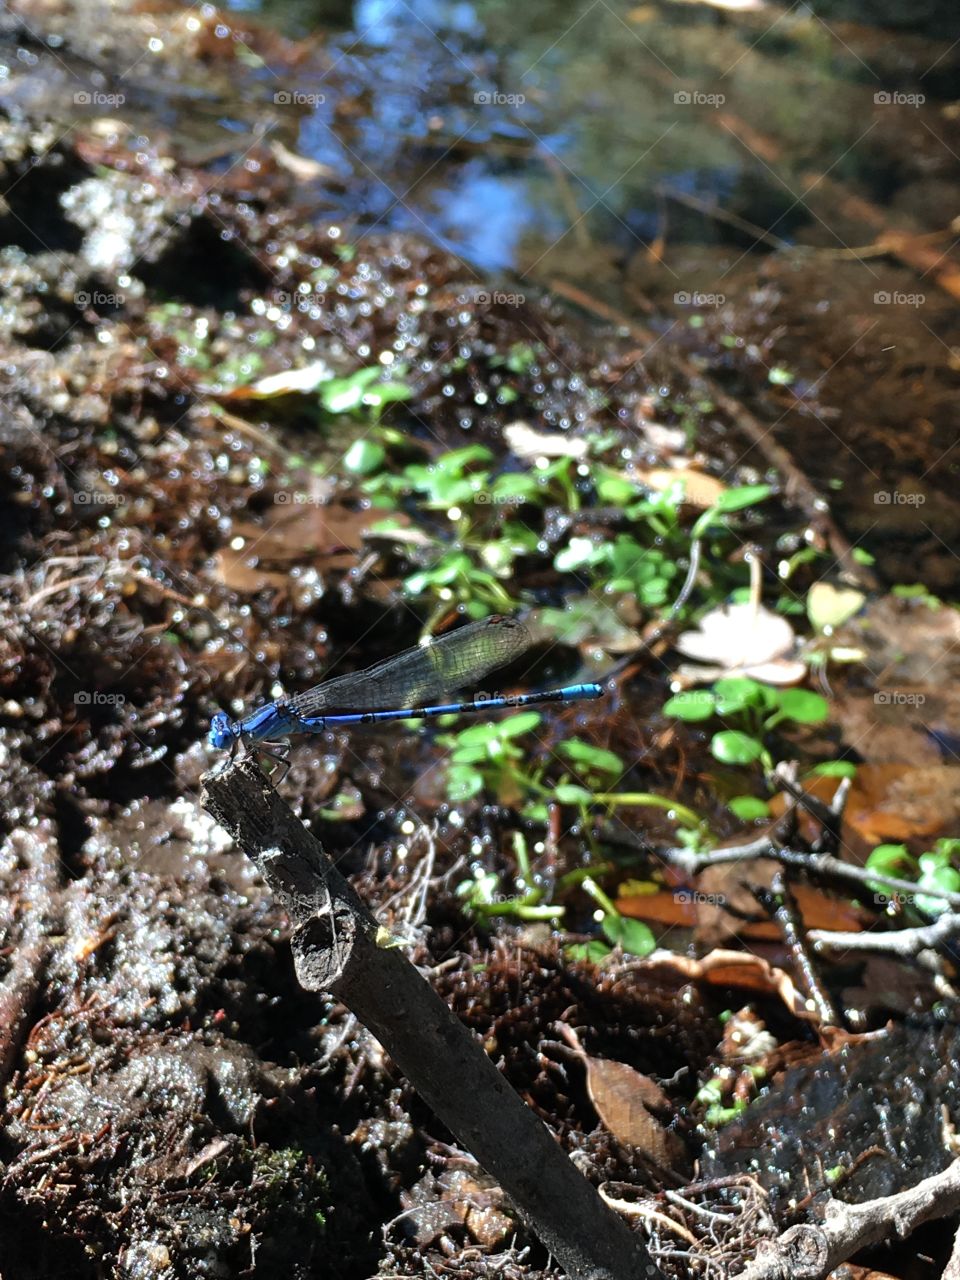 Another damsel fly 